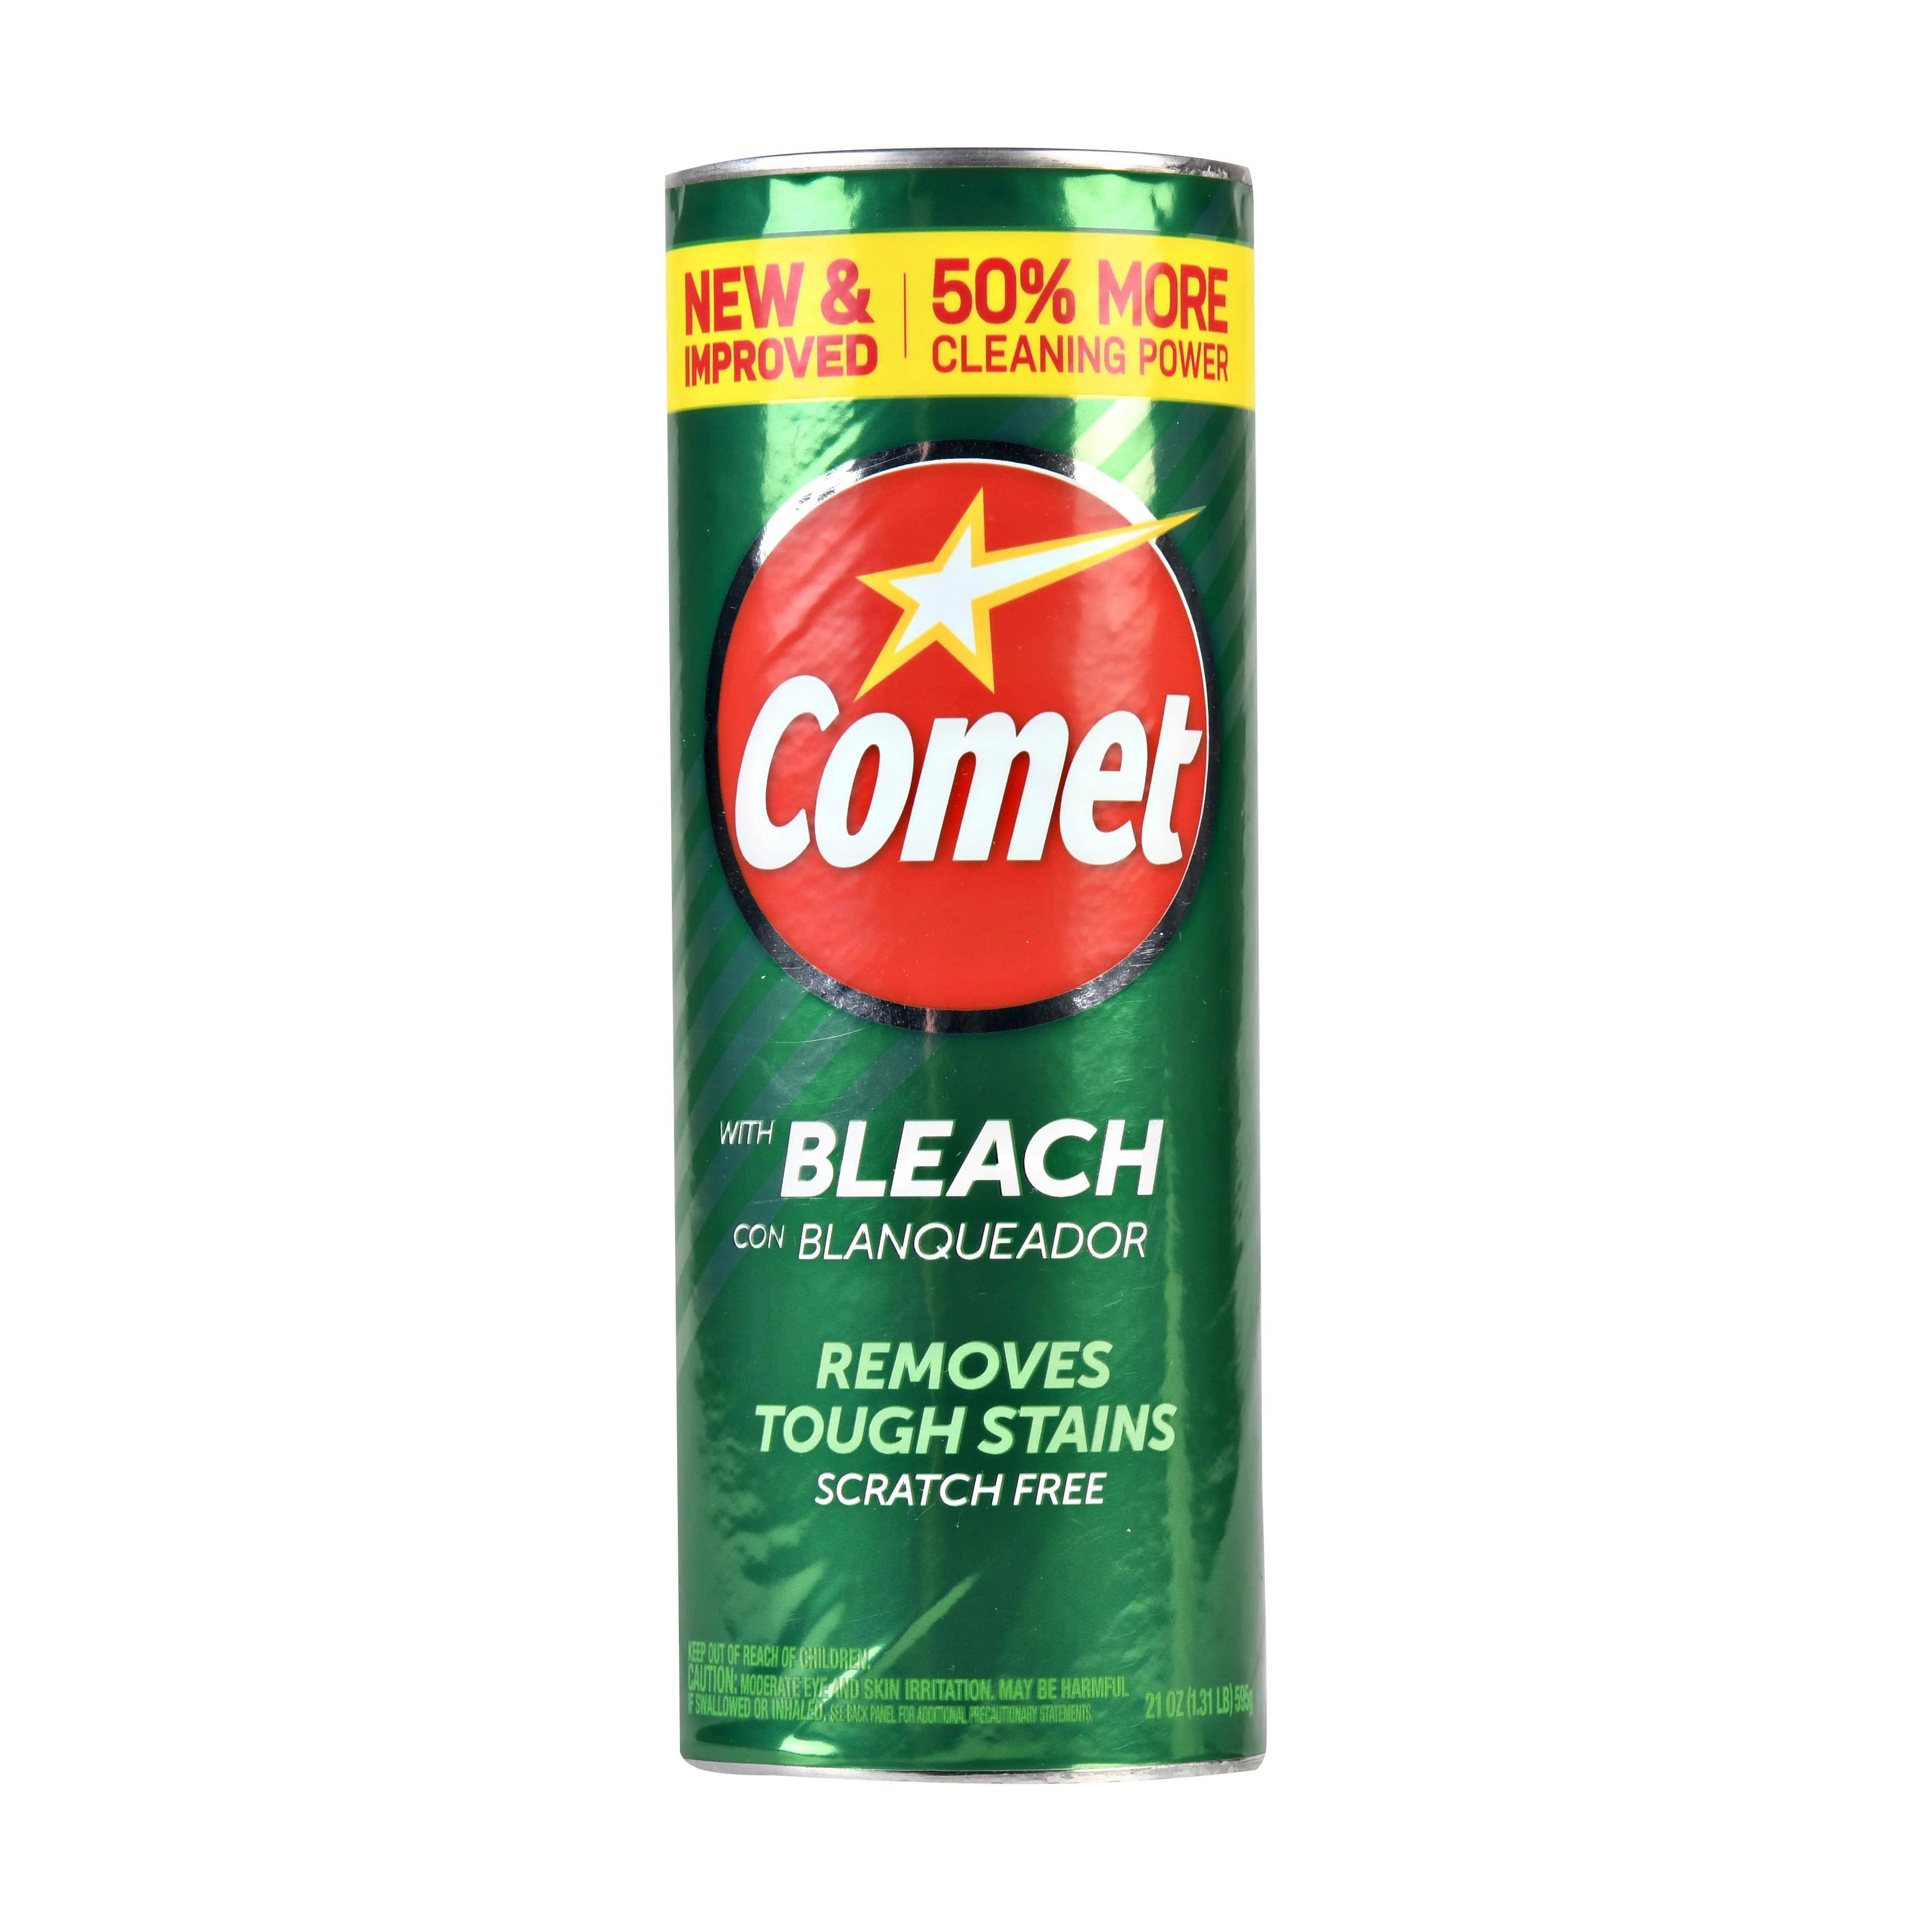 Comet 21 oz. Powder Cleaner with Bleach 85749608811